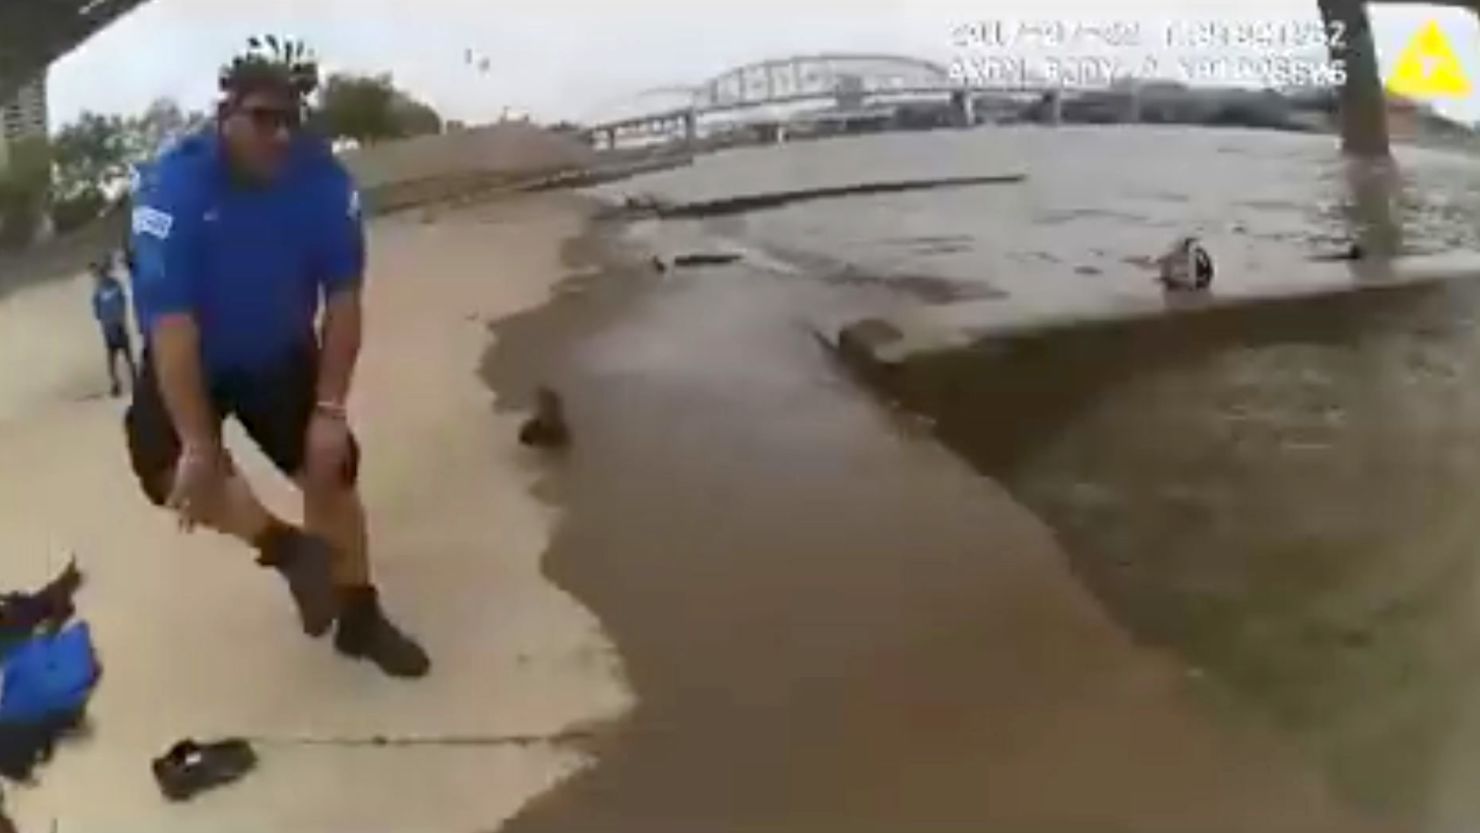 Footage from an officer's body camera shows this officer preparing to jump in the river.